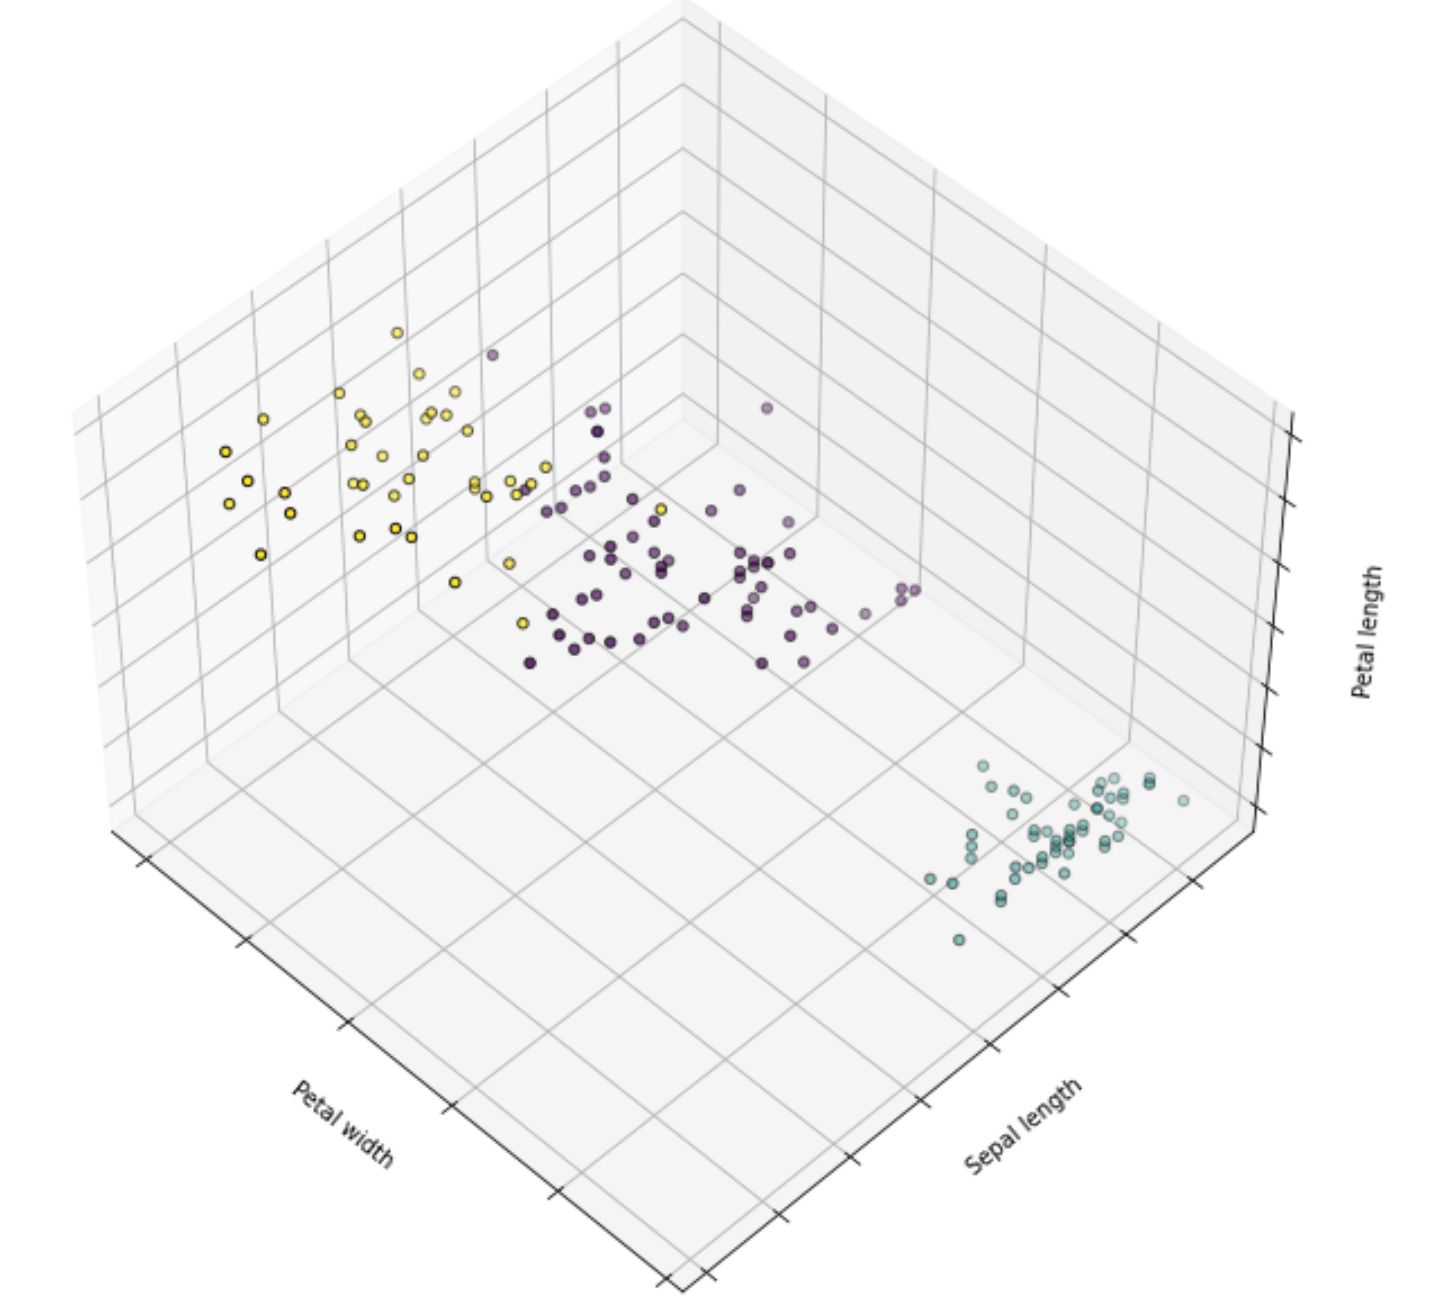 Implementation of k-means clustering on the iris dataset